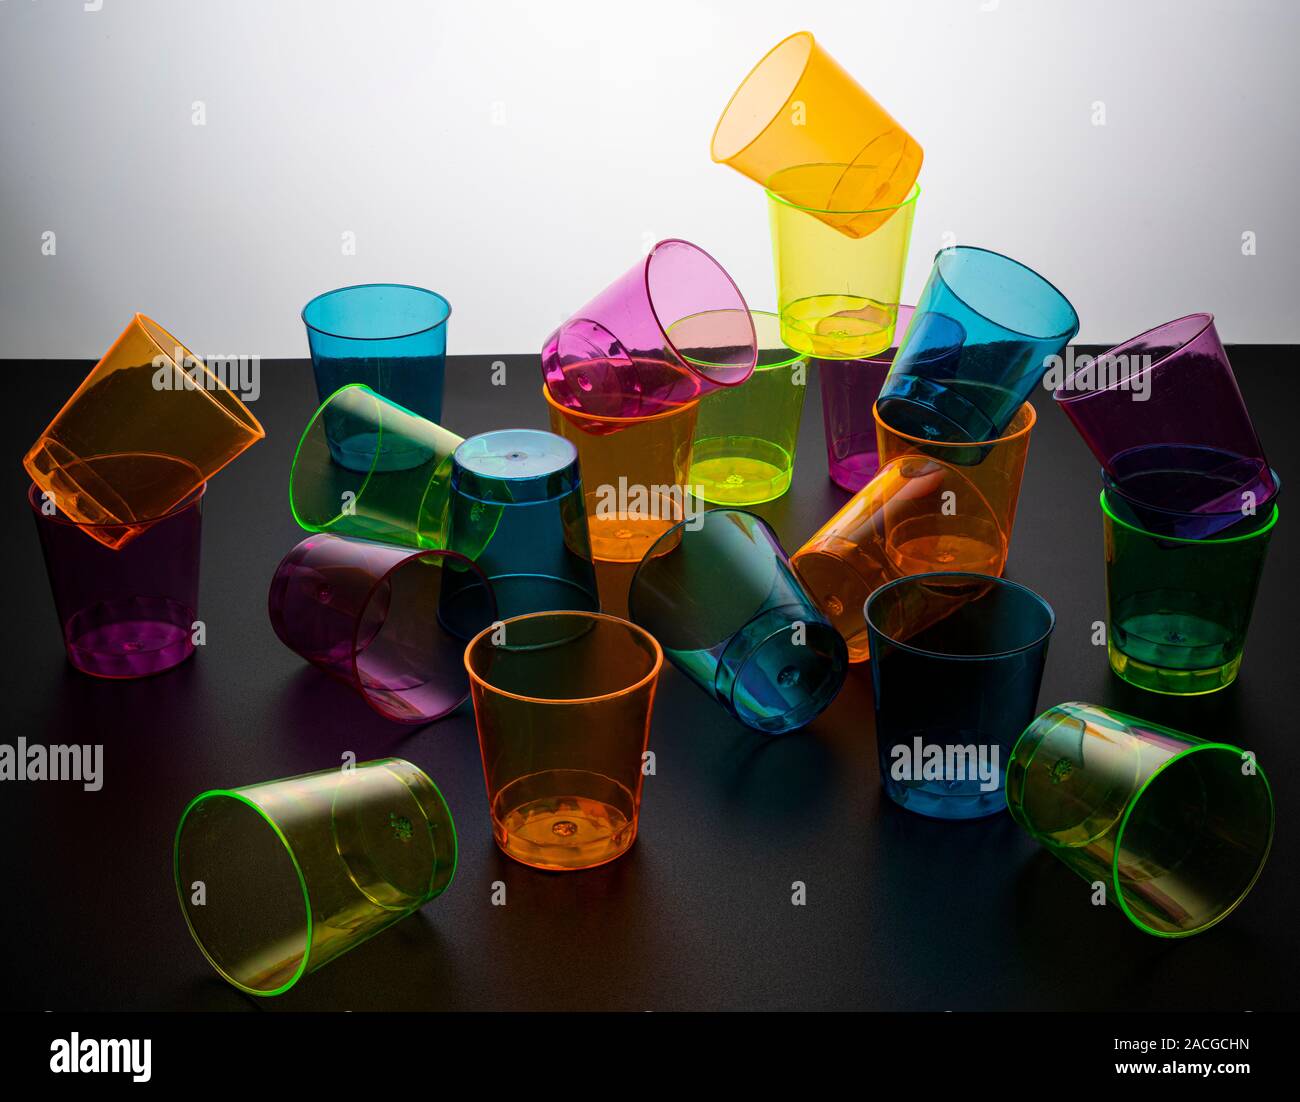 some empty colored glasses scattered on a surface Stock Photo